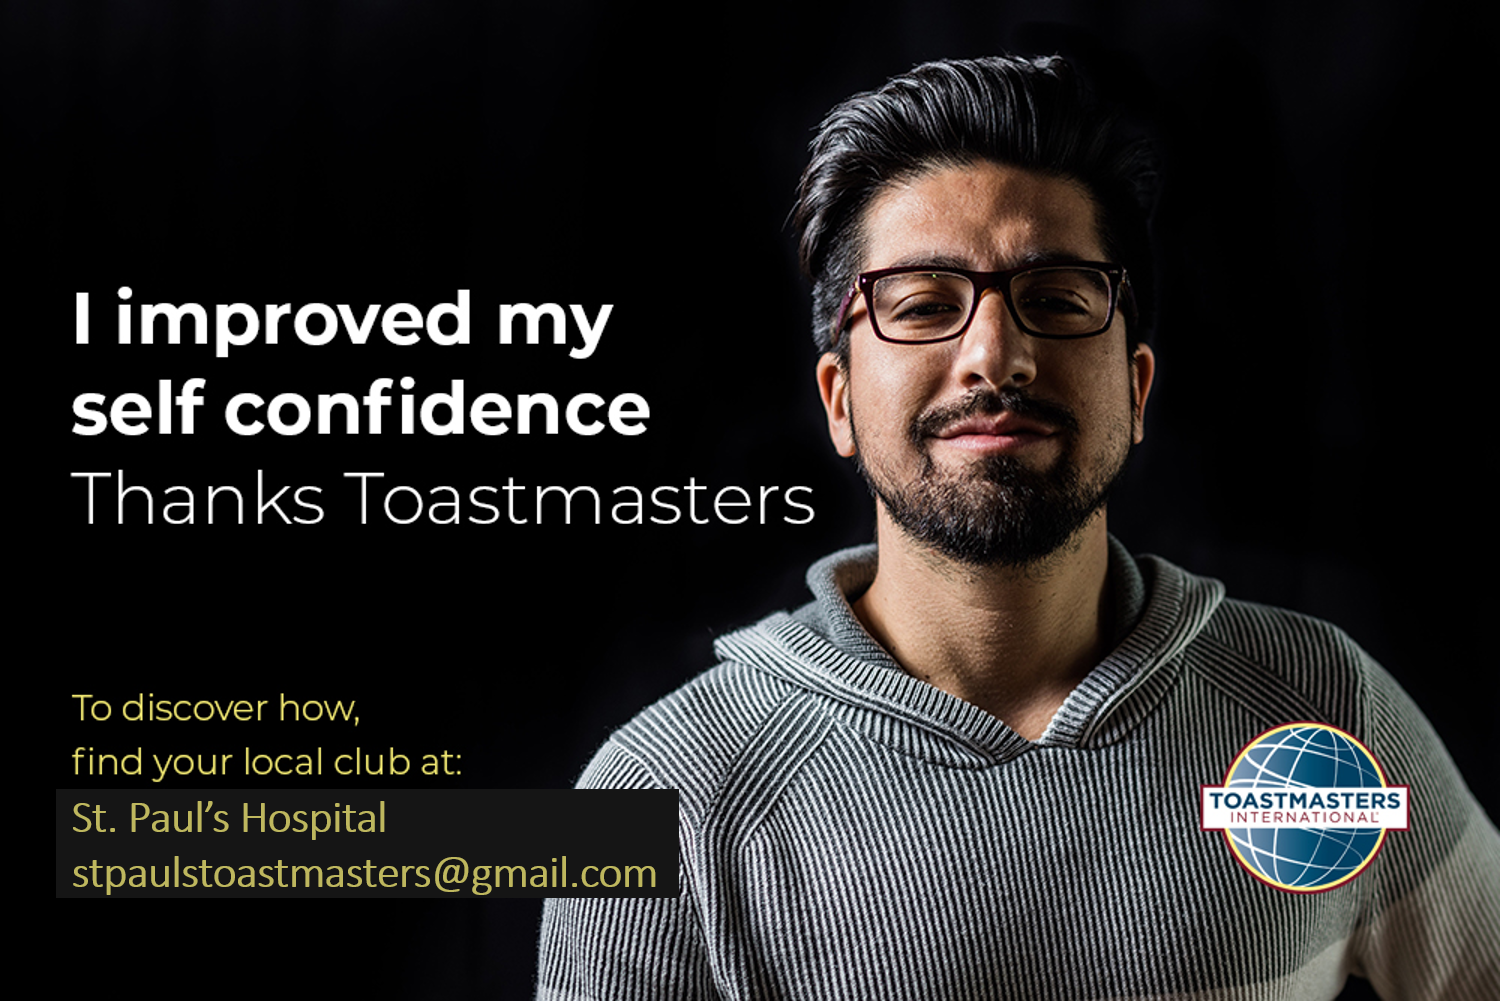 I improved my self confidence. Thanks Toastmasters!